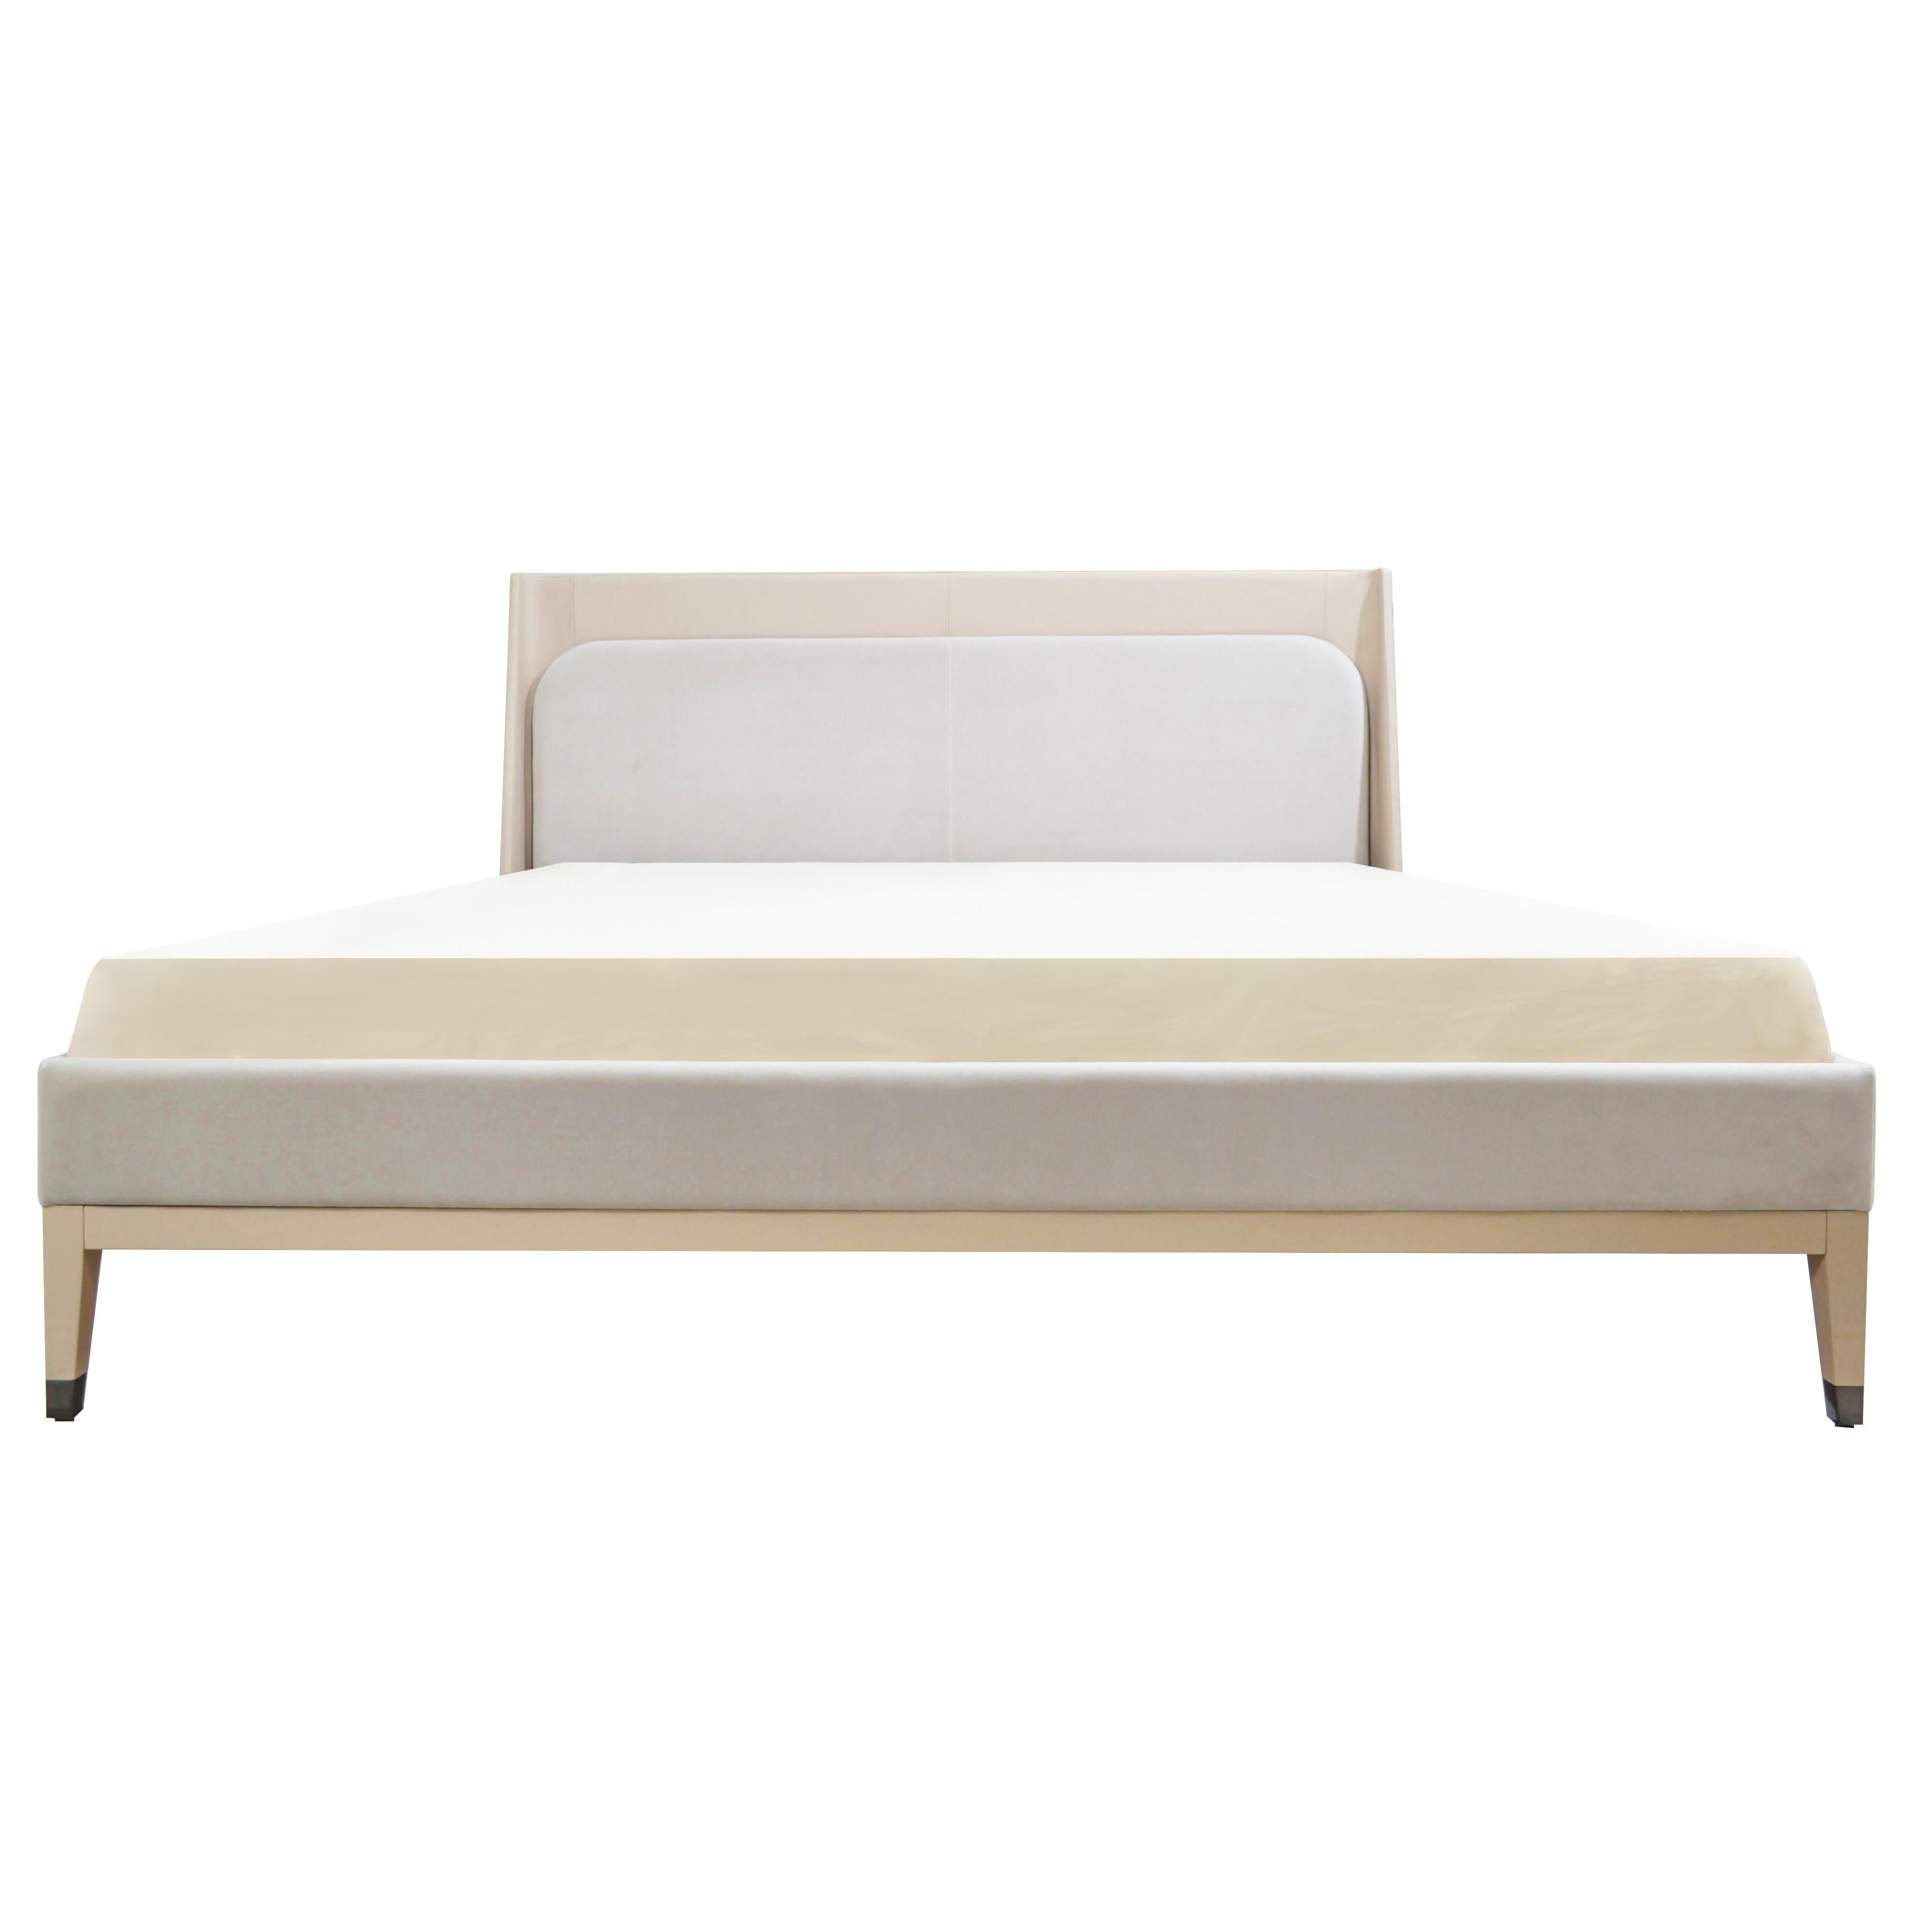 Bed, upholstered, beech wood frame. It is proposed covered in nubuck leather and cotton velvet, but it is customizable. The legs are in laquered Cappucino high-gloss.
Customers can choose from a variety of fabrics. Made to order in custom sizes (